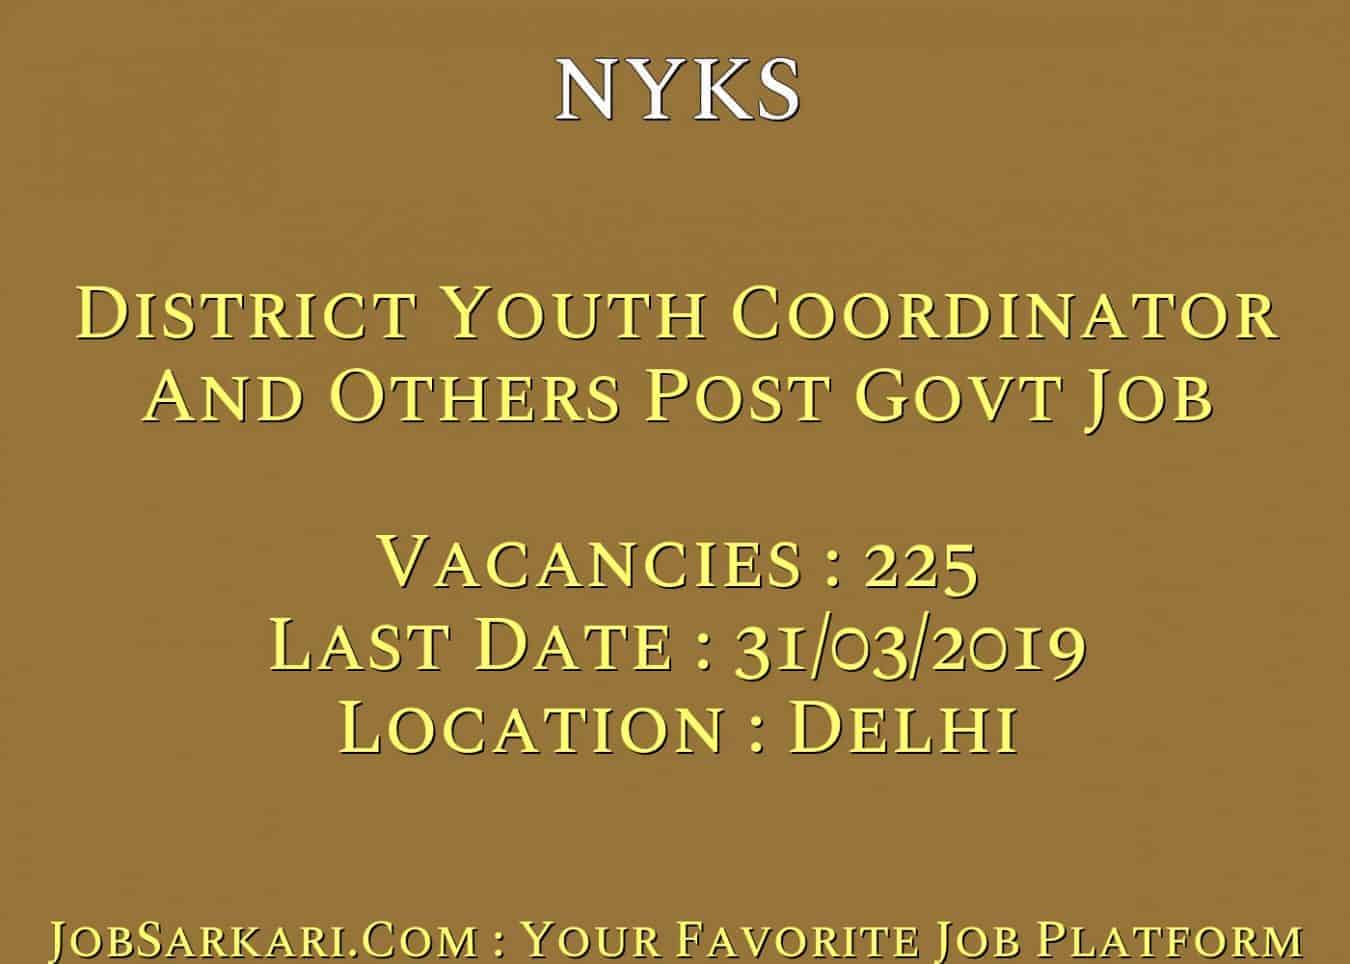 NYKS Recruitment 2019 For District Youth Coordinator And Others Post Govt Job